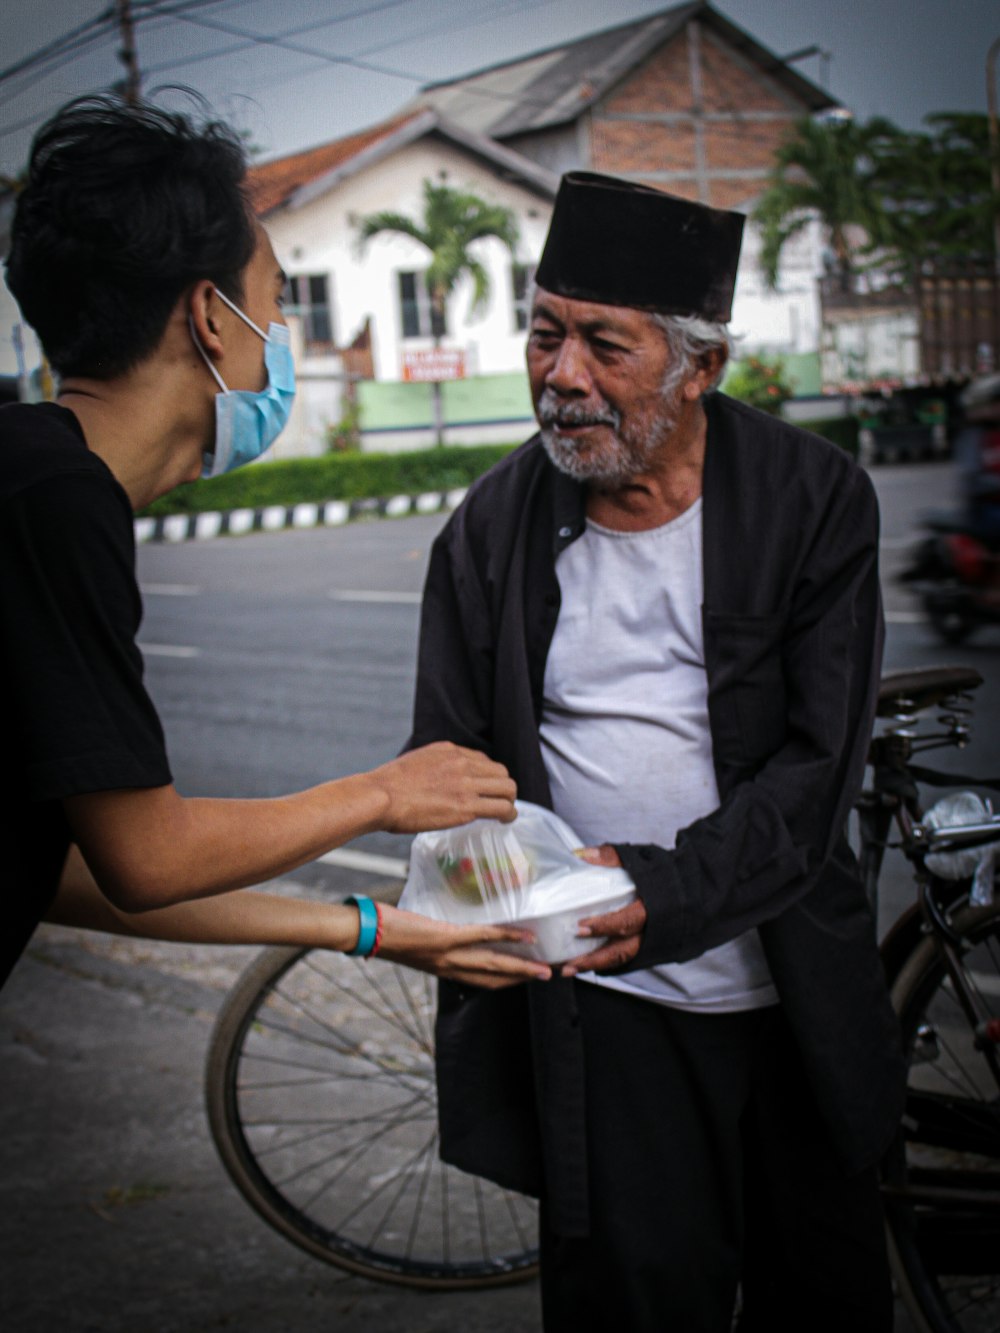 a man handing something to a woman on the street